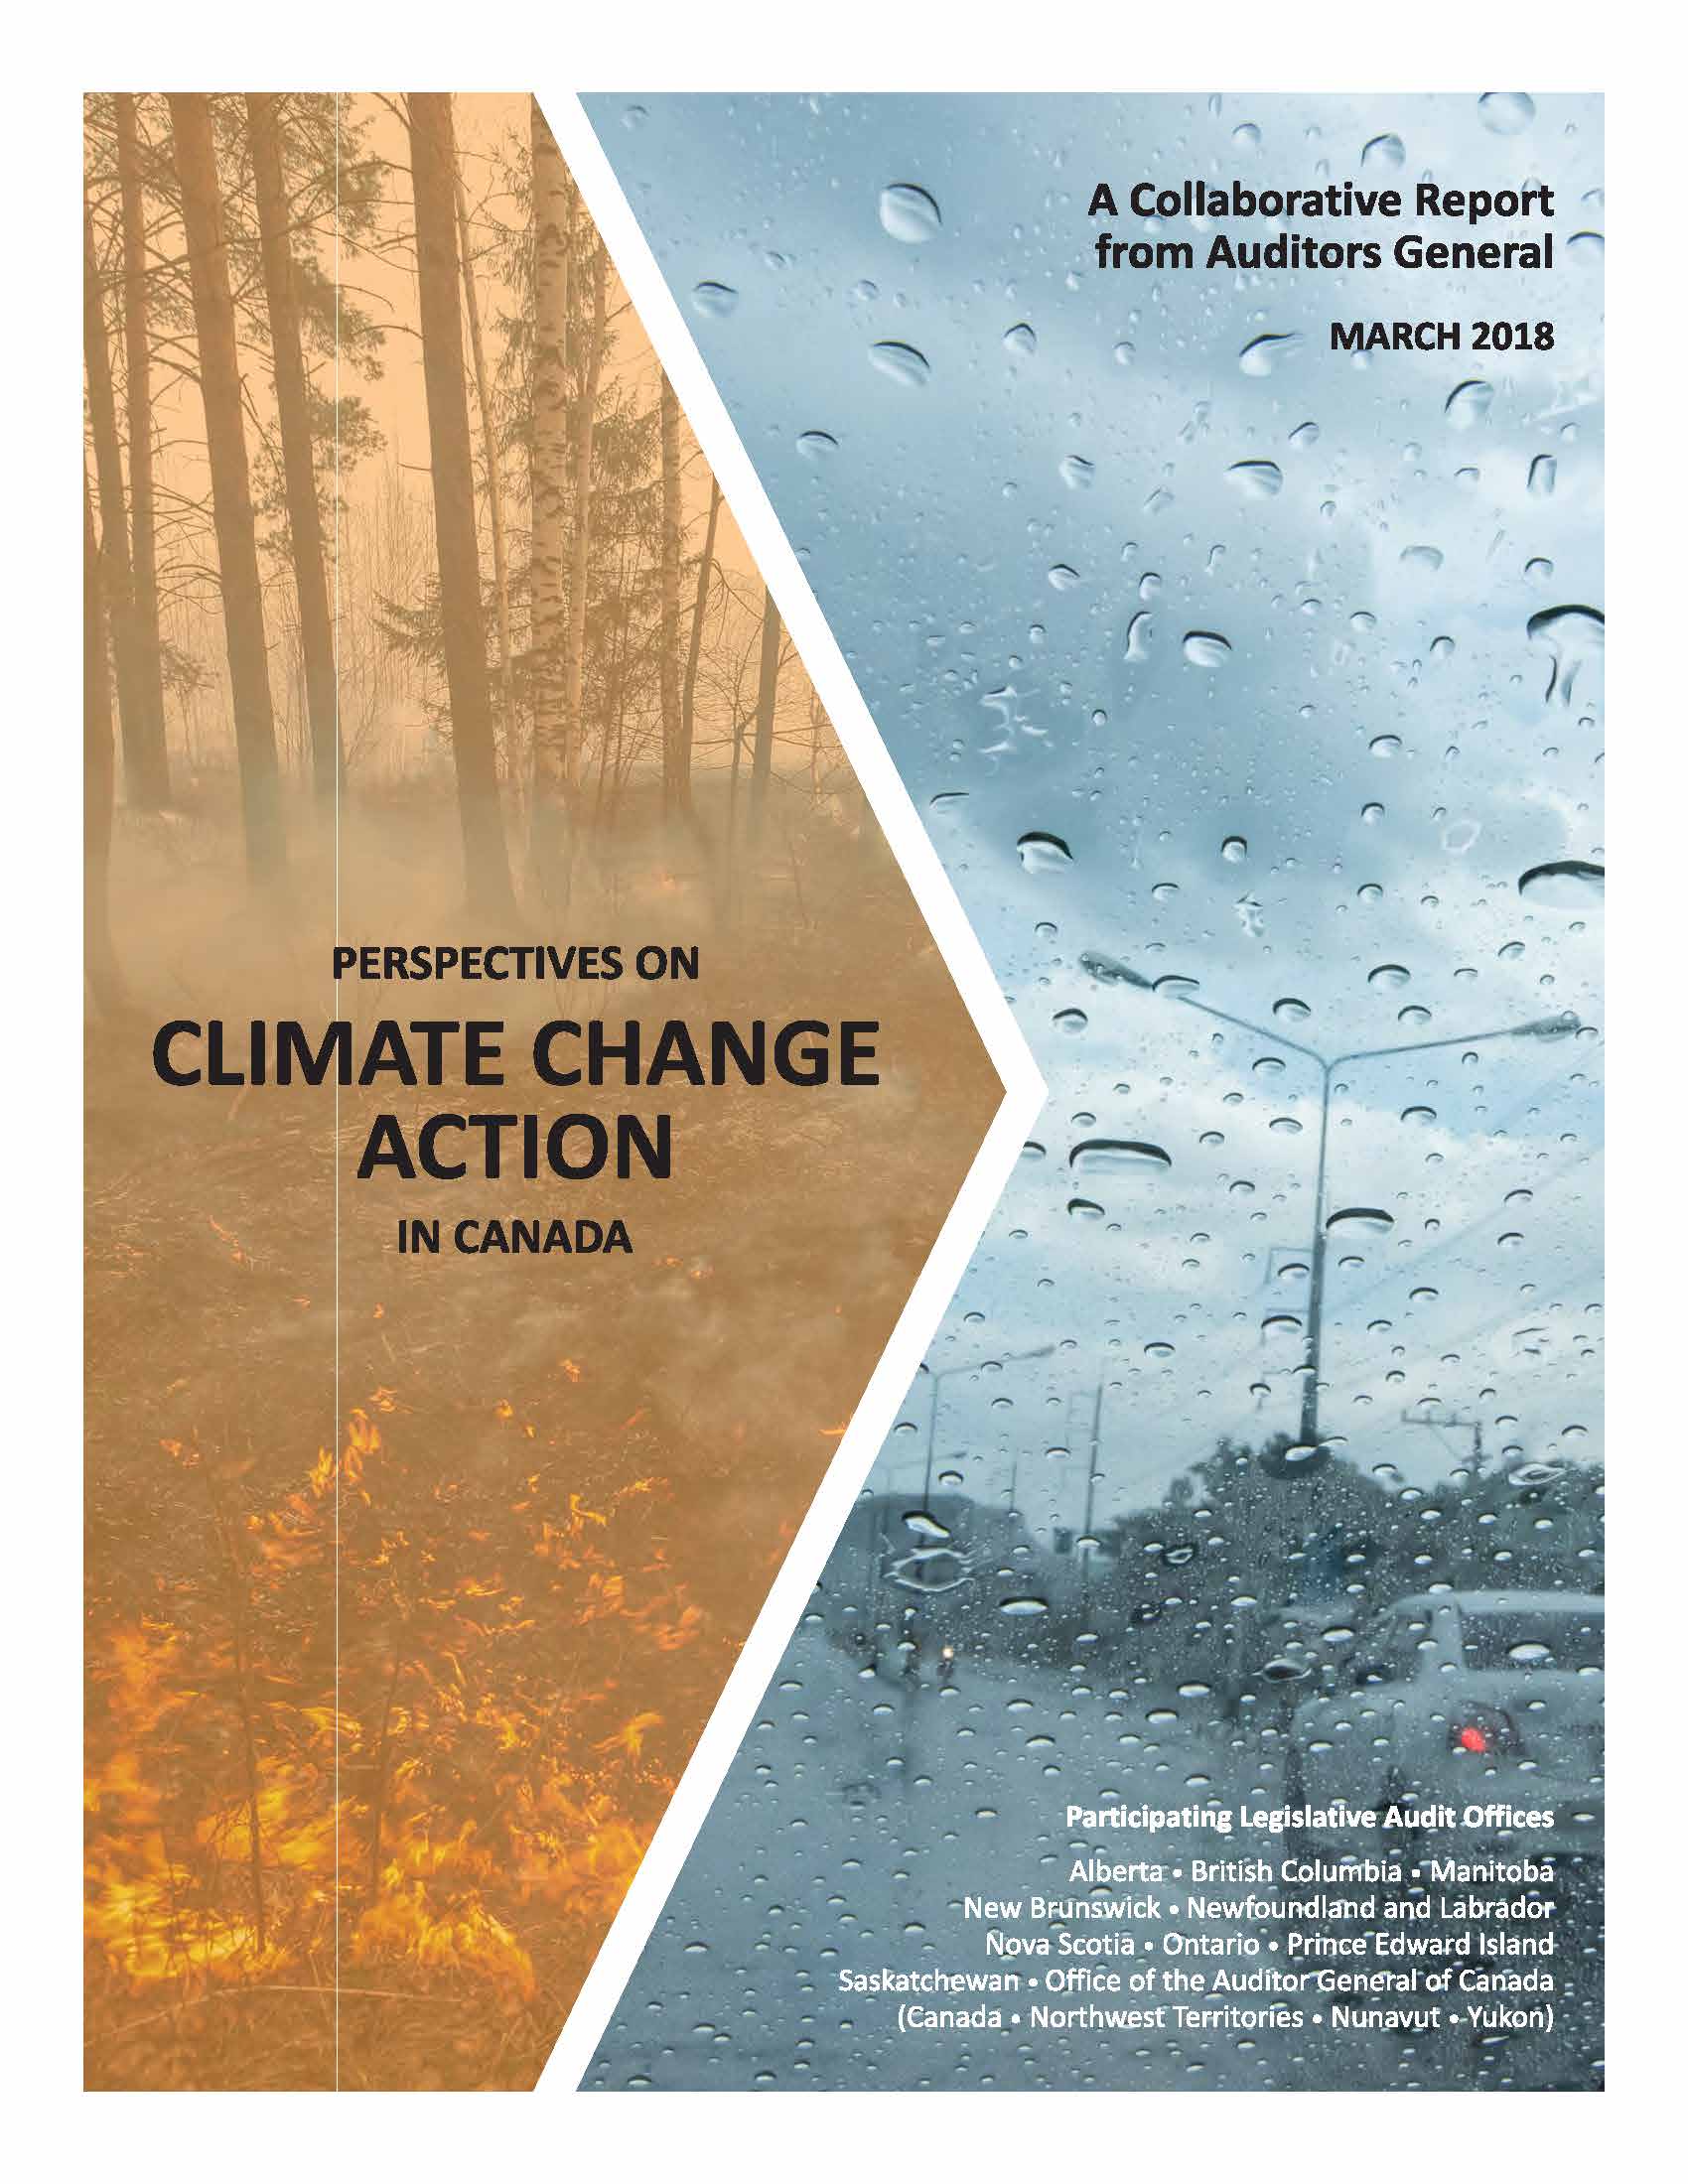 Perspectives on Climate Change Action in Canada: A Collaborative Report from Auditors General